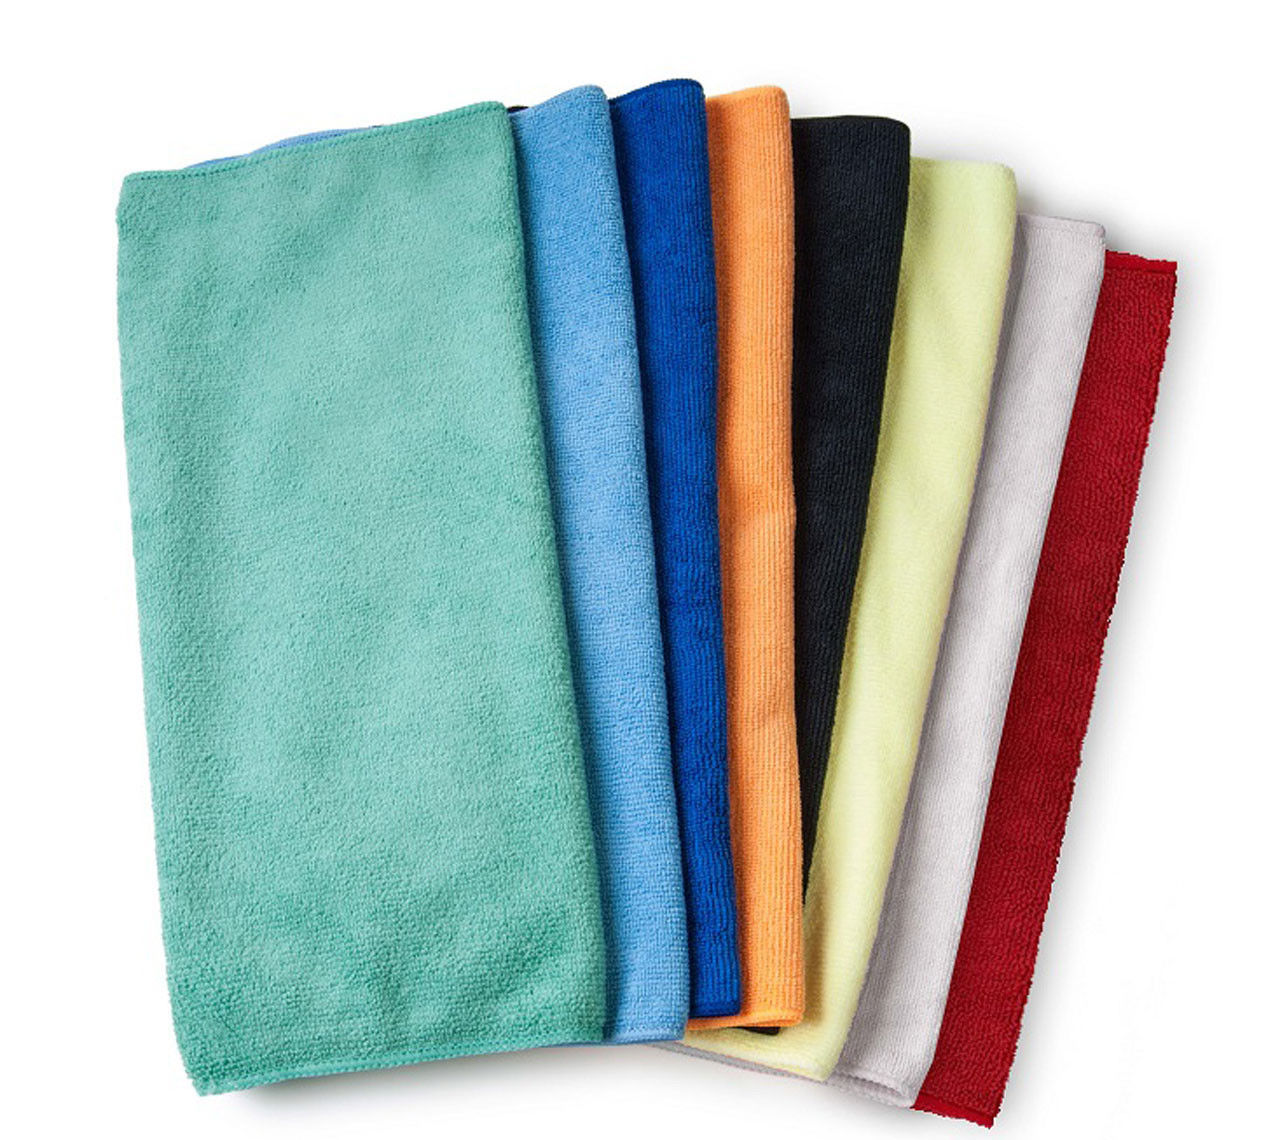 Is it possible to dry Microfiber Golf Towels in bulk, 300 gsm,16 x 16, in the dryer?